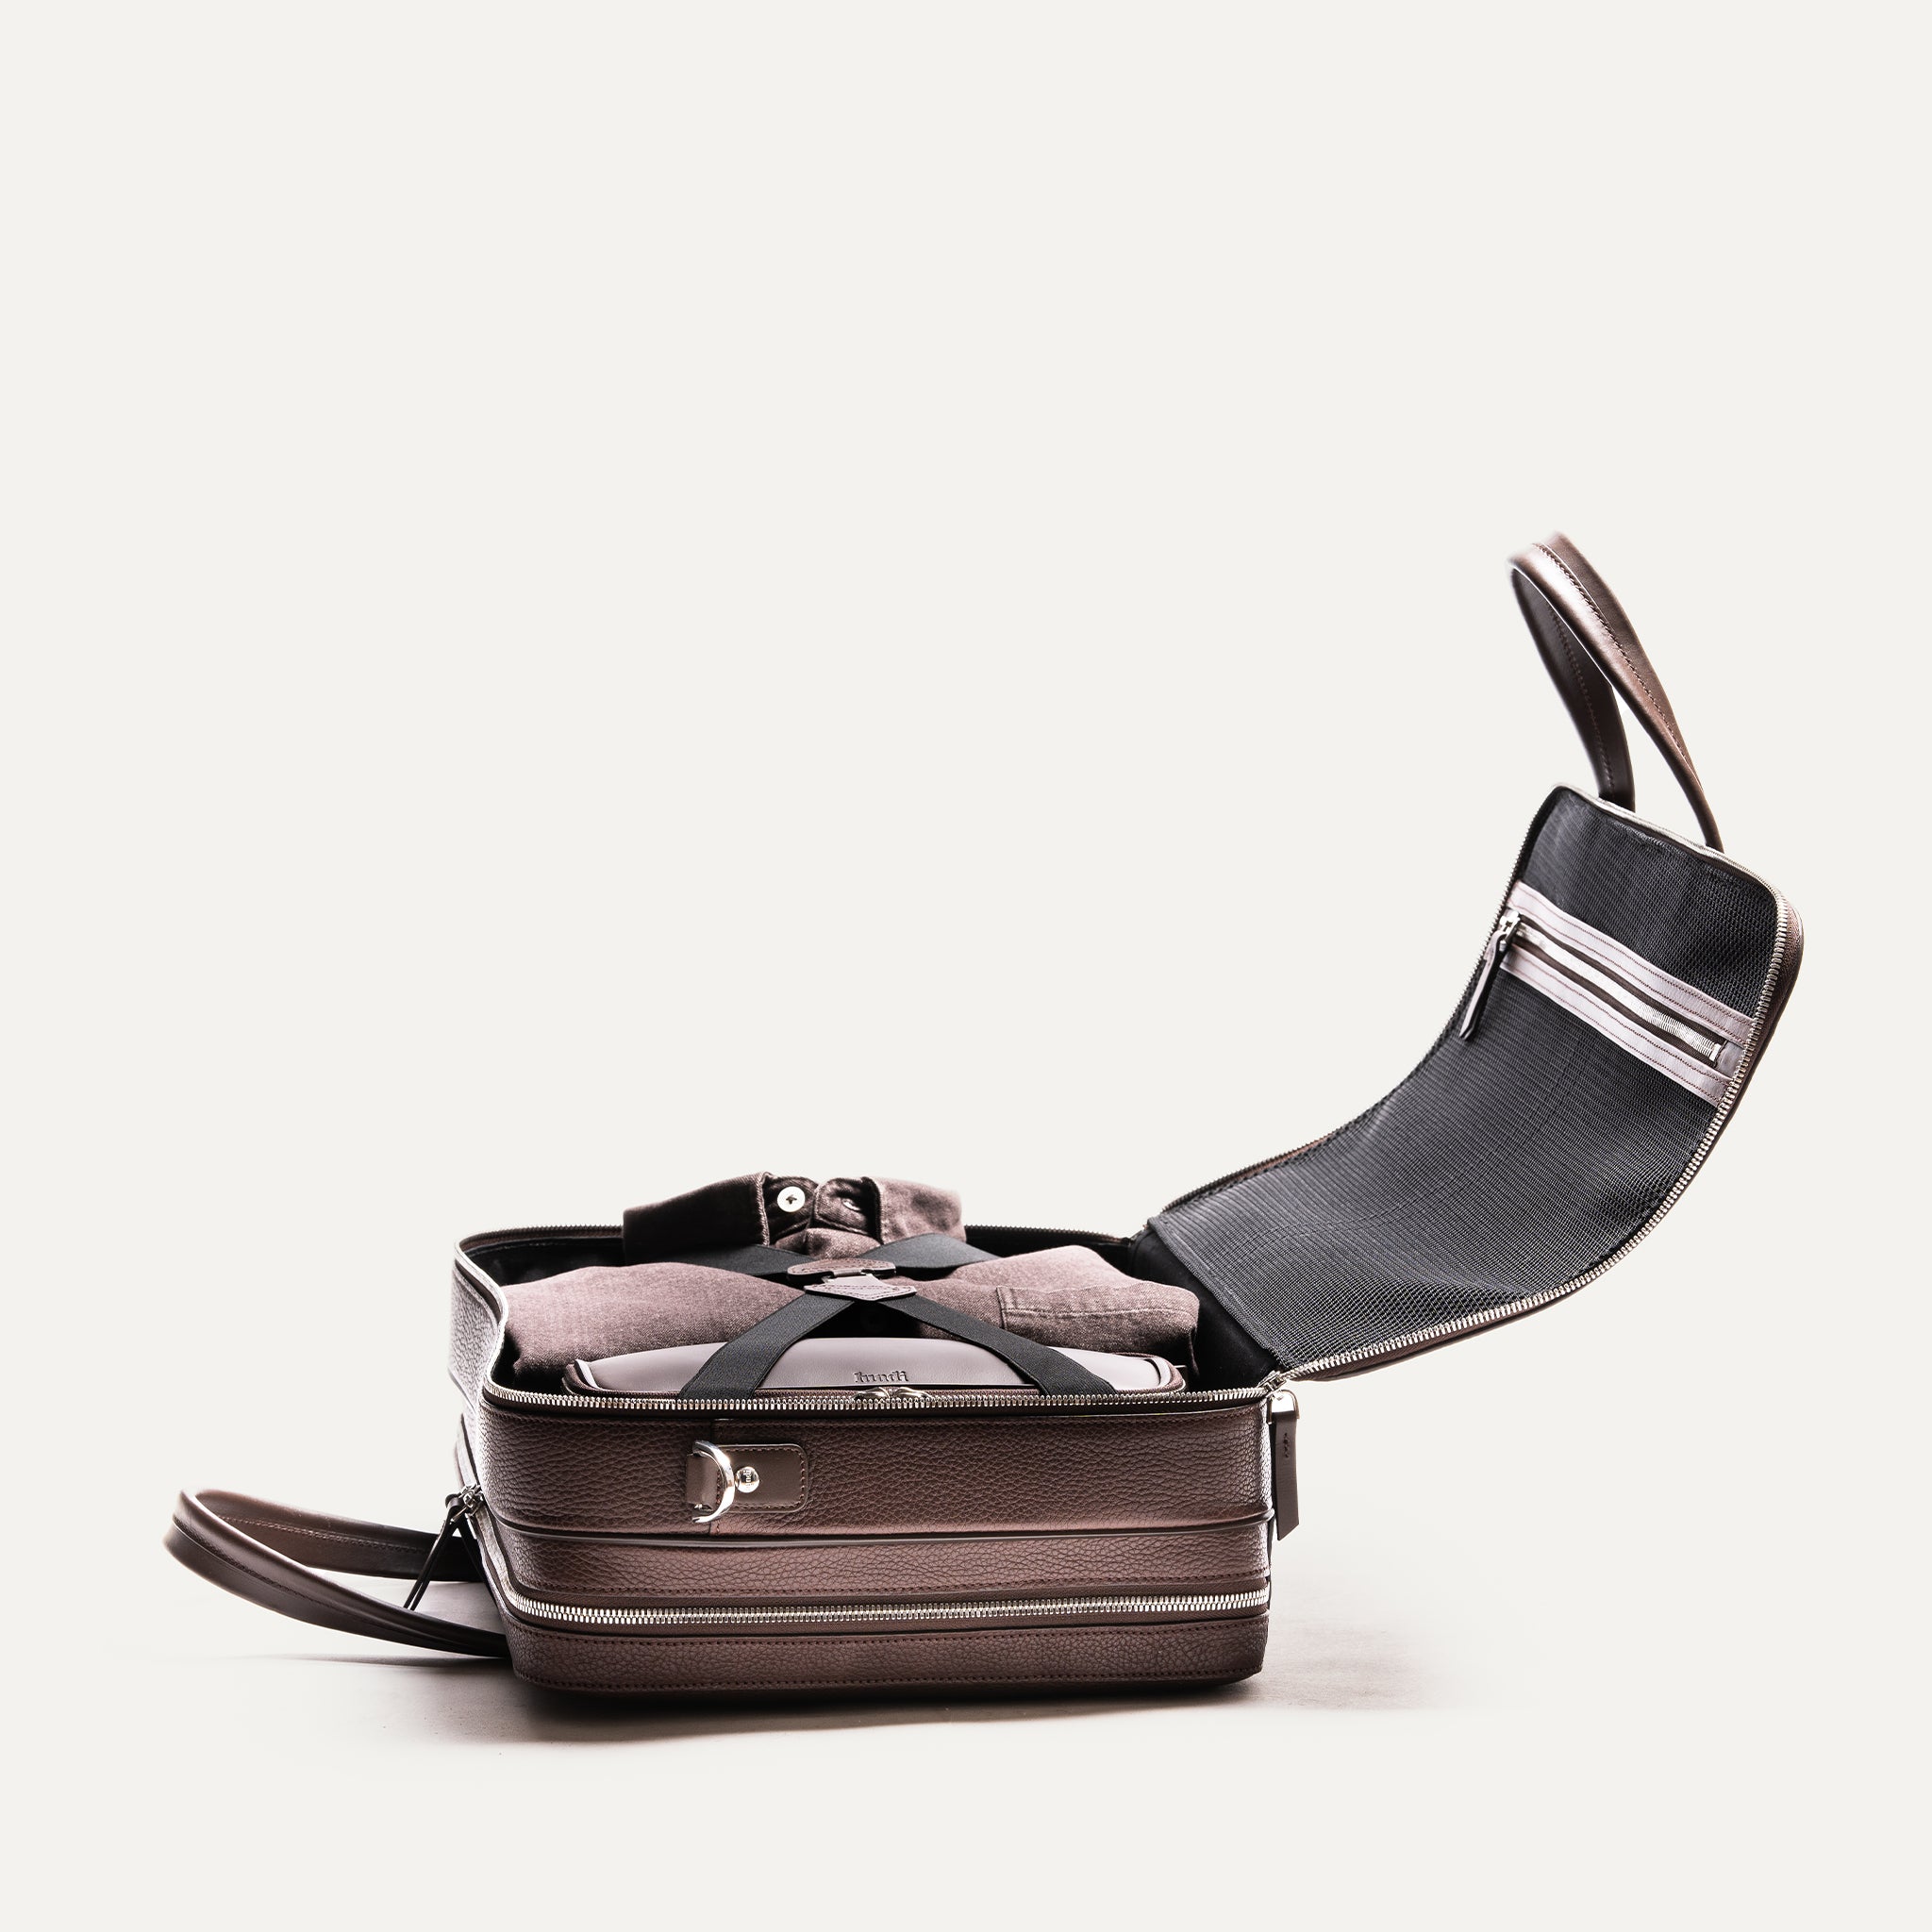 TILIO II - Chestnut | lundi 36 hour laptop bag in full grained leather